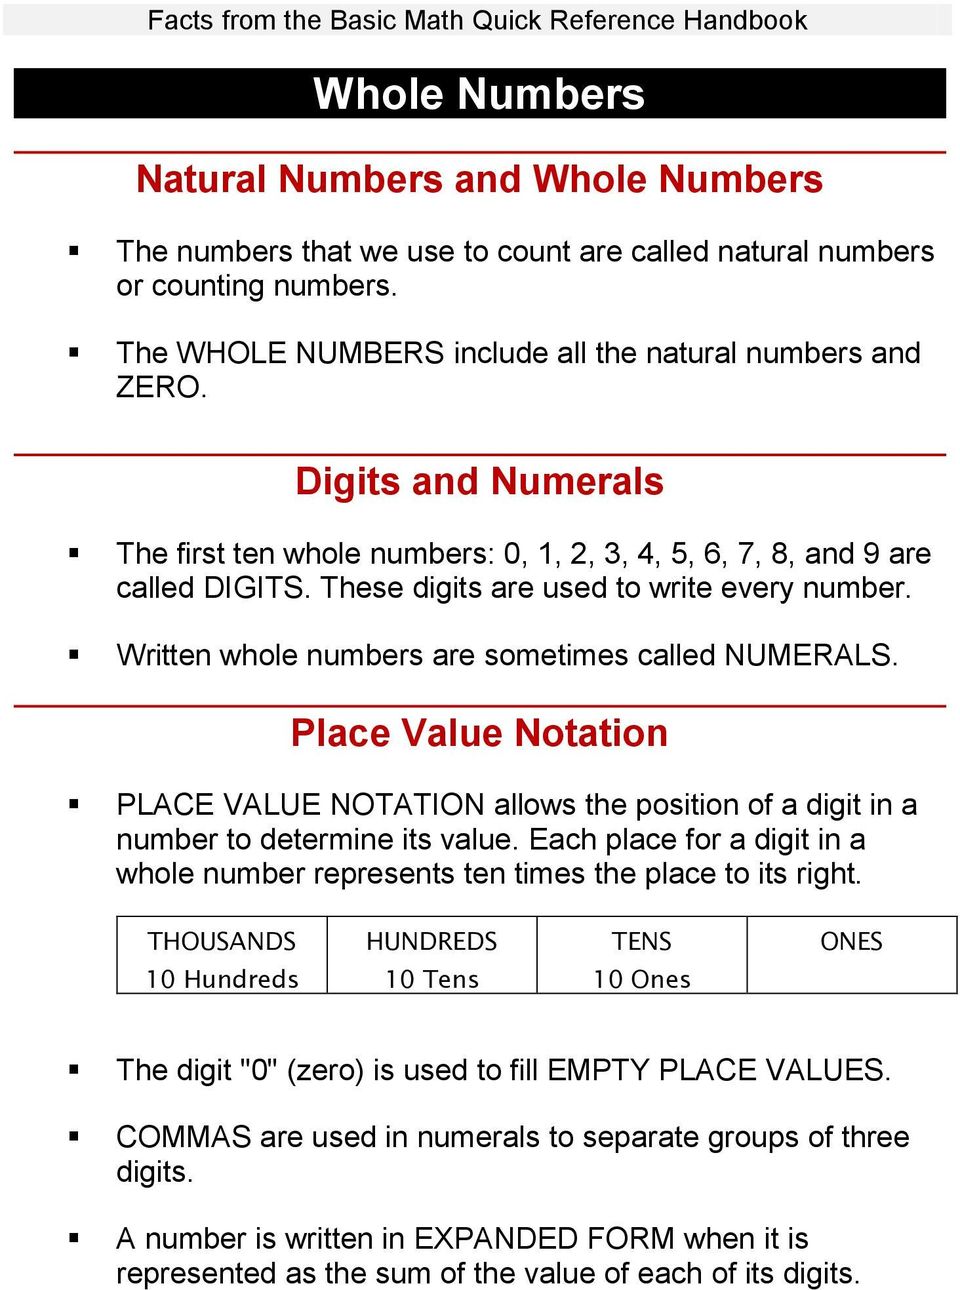 Place Value Notation PLACE VALUE NOTATION allows the position of a digit in a number to determine its value. Each place for a digit in a whole number represents ten times the place to its right.